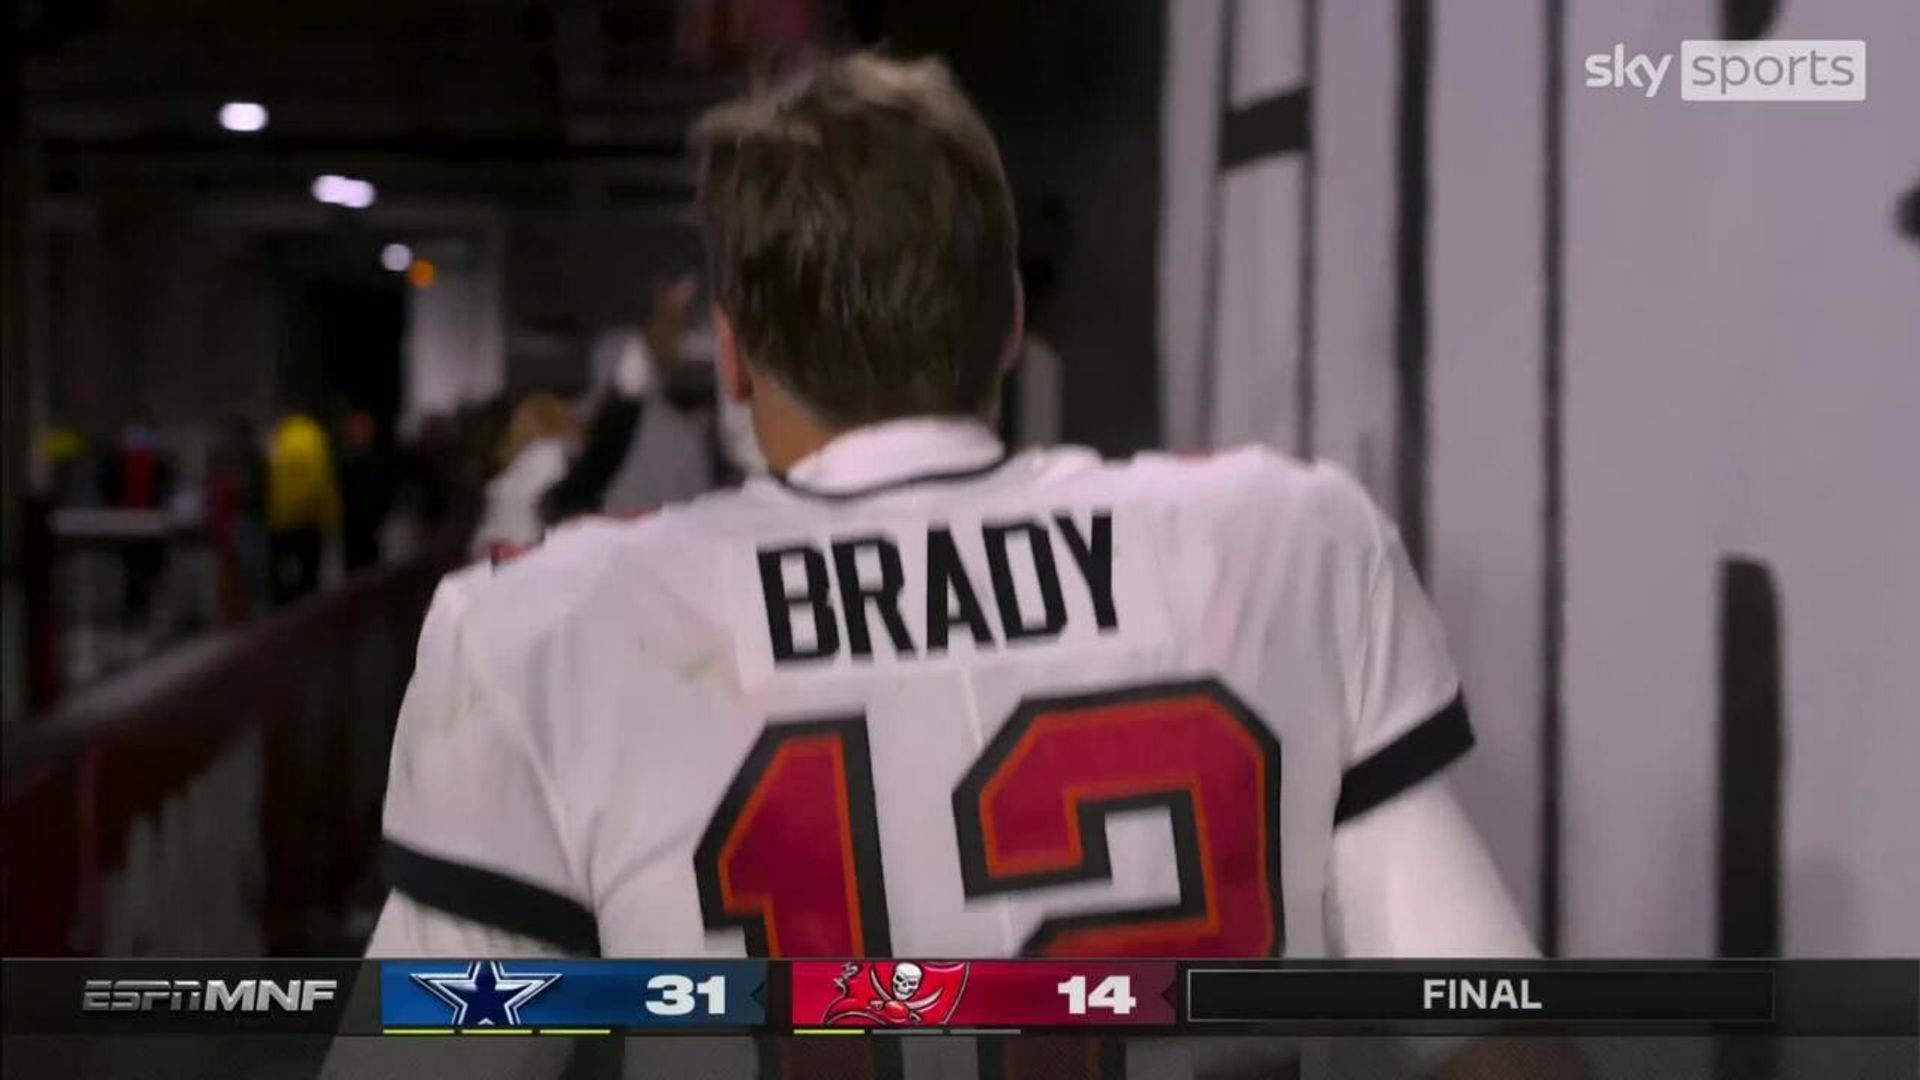 'If this is it... what a career' - Is this Brady's NFL goodbye?